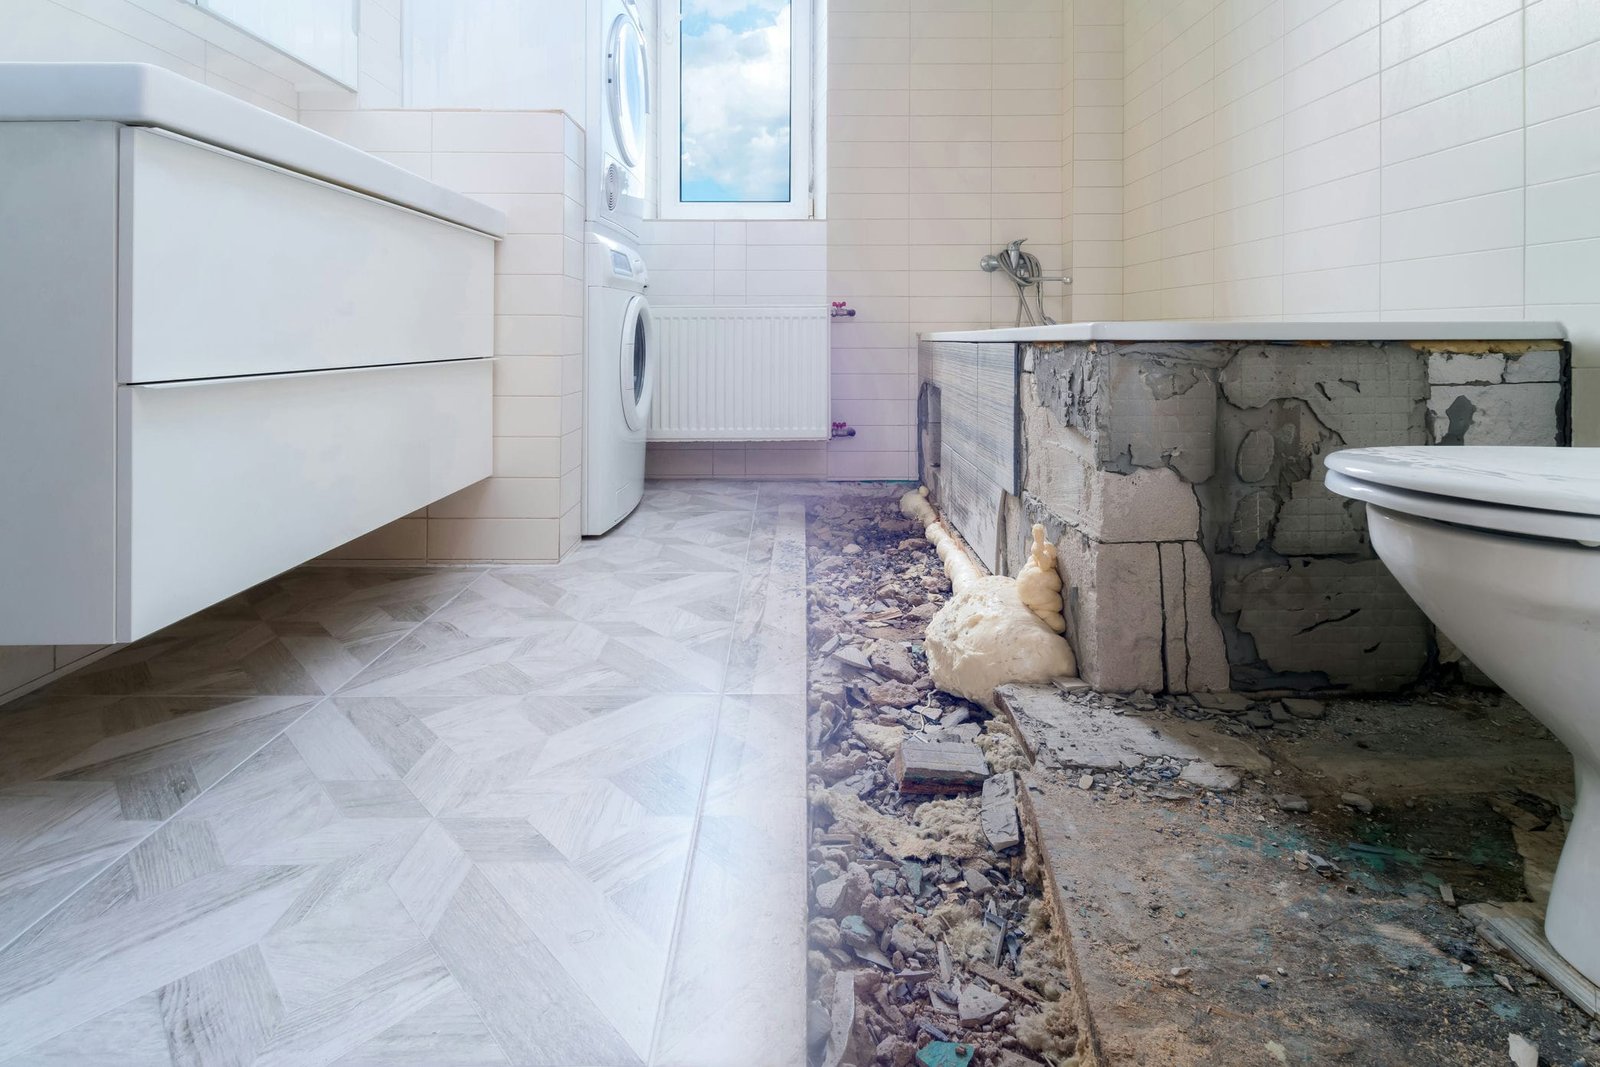 Why Choose Our Bathroom Remodel Services in West Allis